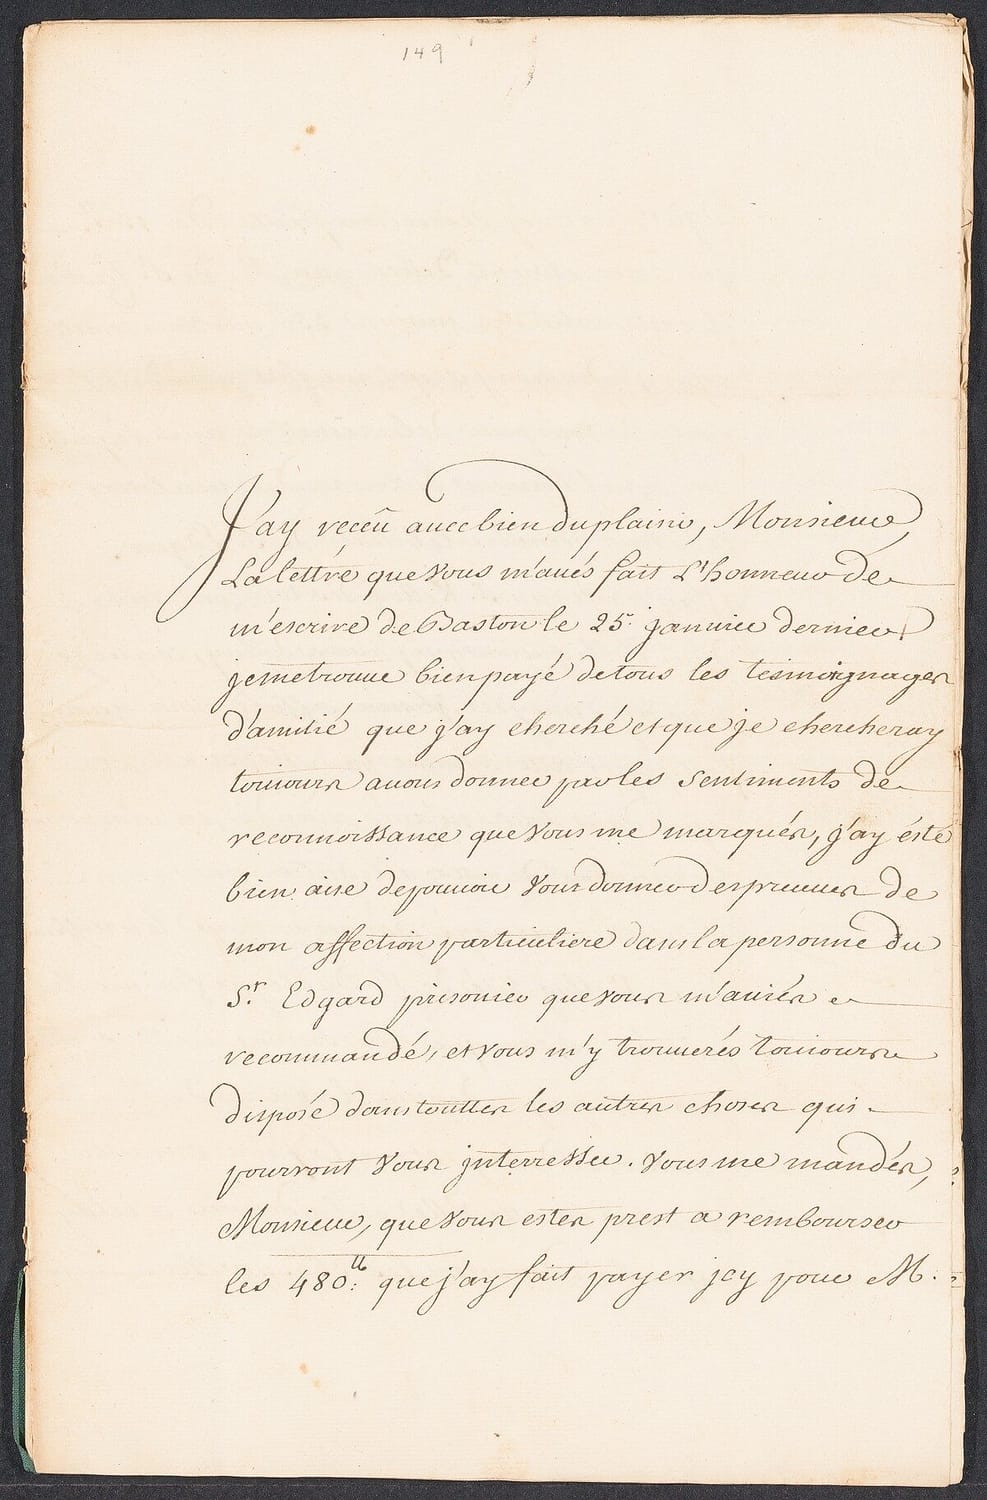 Vaudreuil, Philippe de Rigaud, marquis de, 1640-1725. MS.L.s. to [John Nelson], 2 May 1725